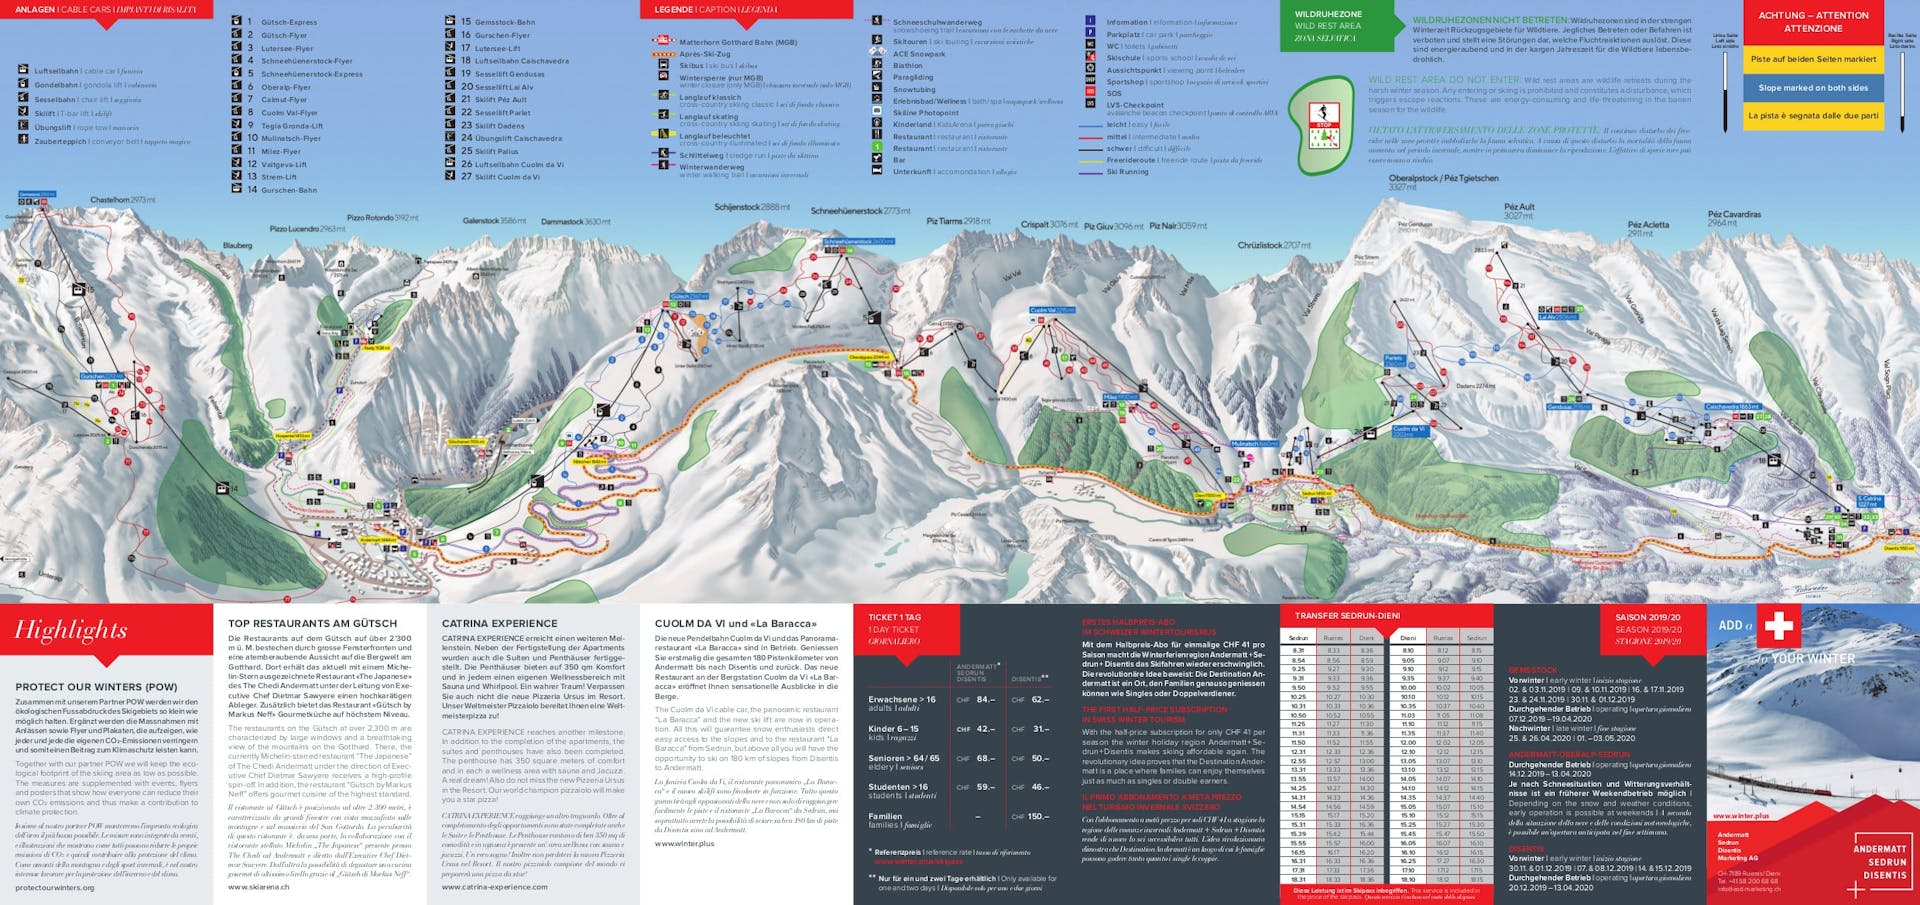 CHAND piste map